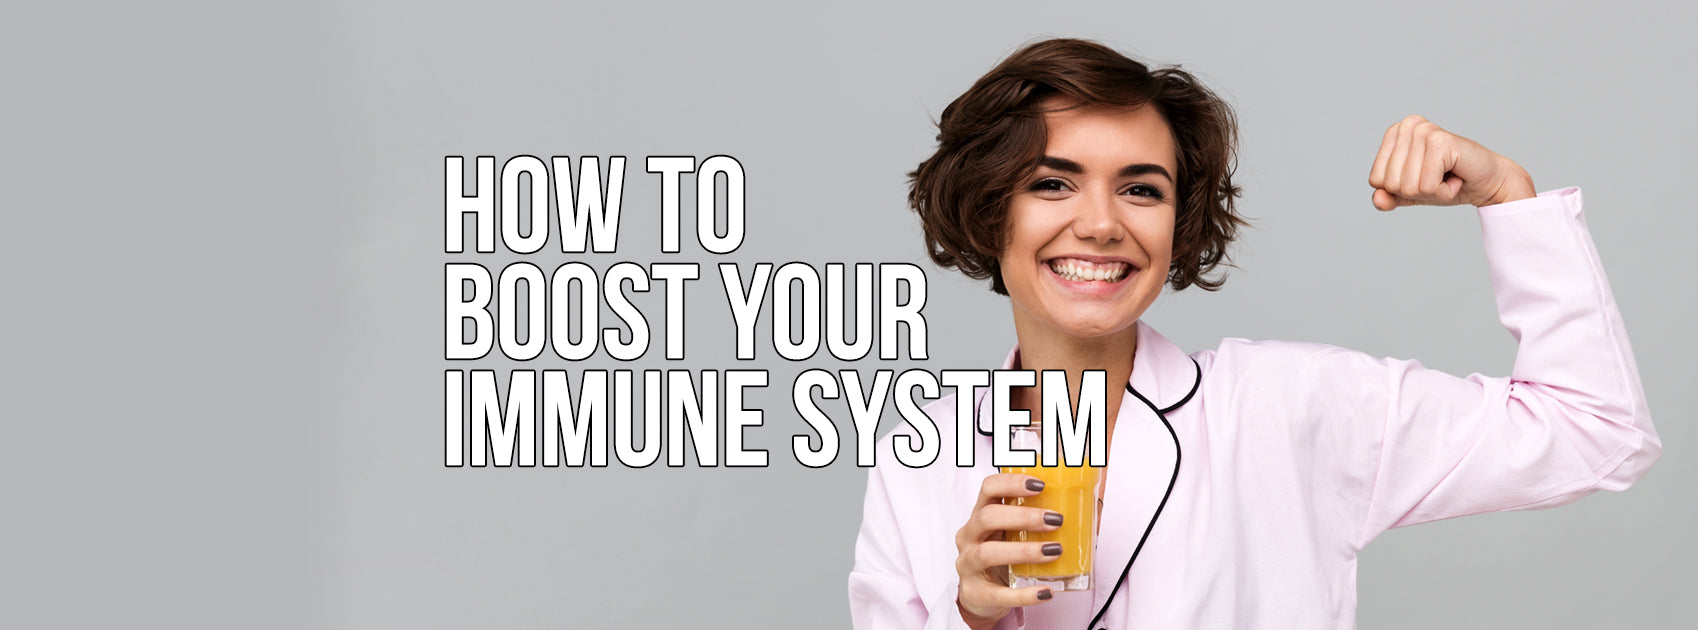 OUR GUIDE ON HOW TO BOOST YOUR IMMUNE SYSTEM